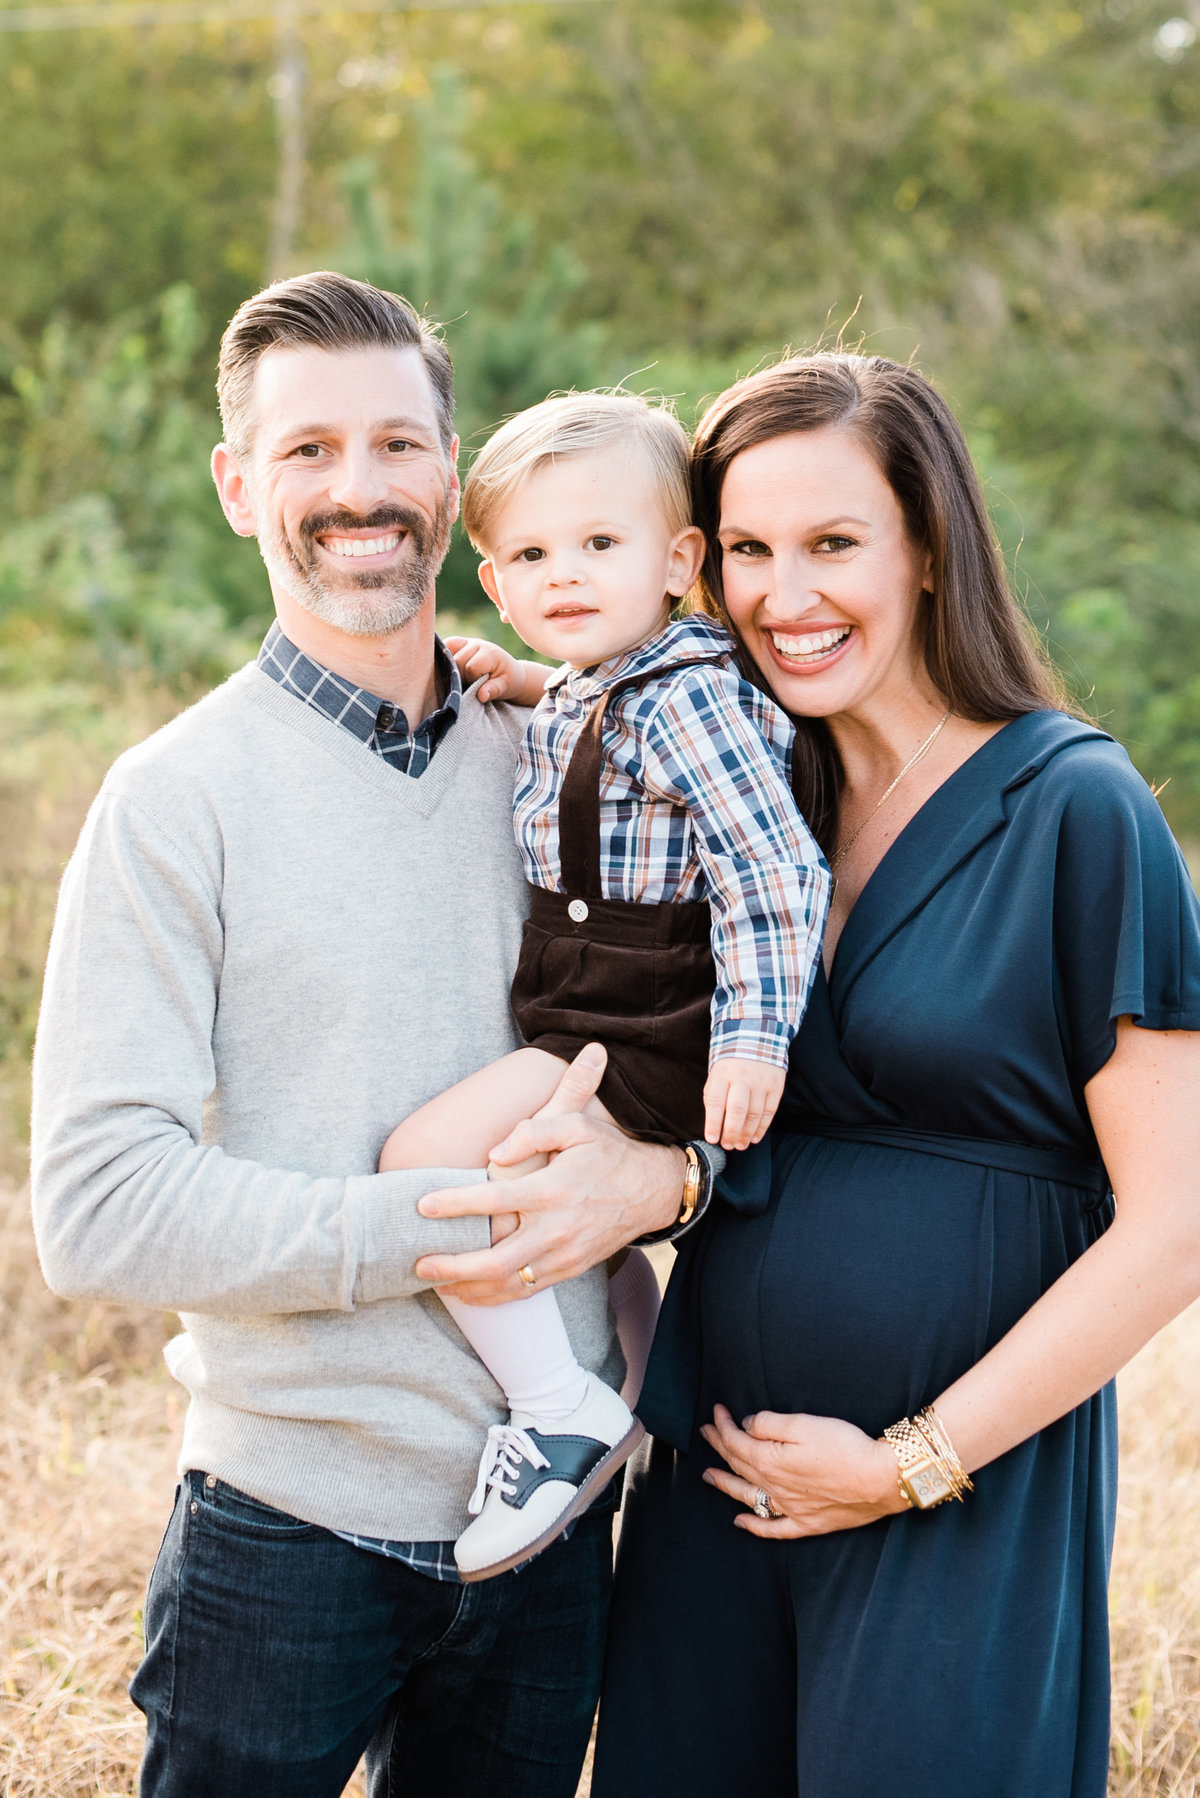 Family smiles for a portrait with their toddler at a Raleigh family photo session. Photographed by Raleigh NC Family Photographer A.J. Dunlap Photography.